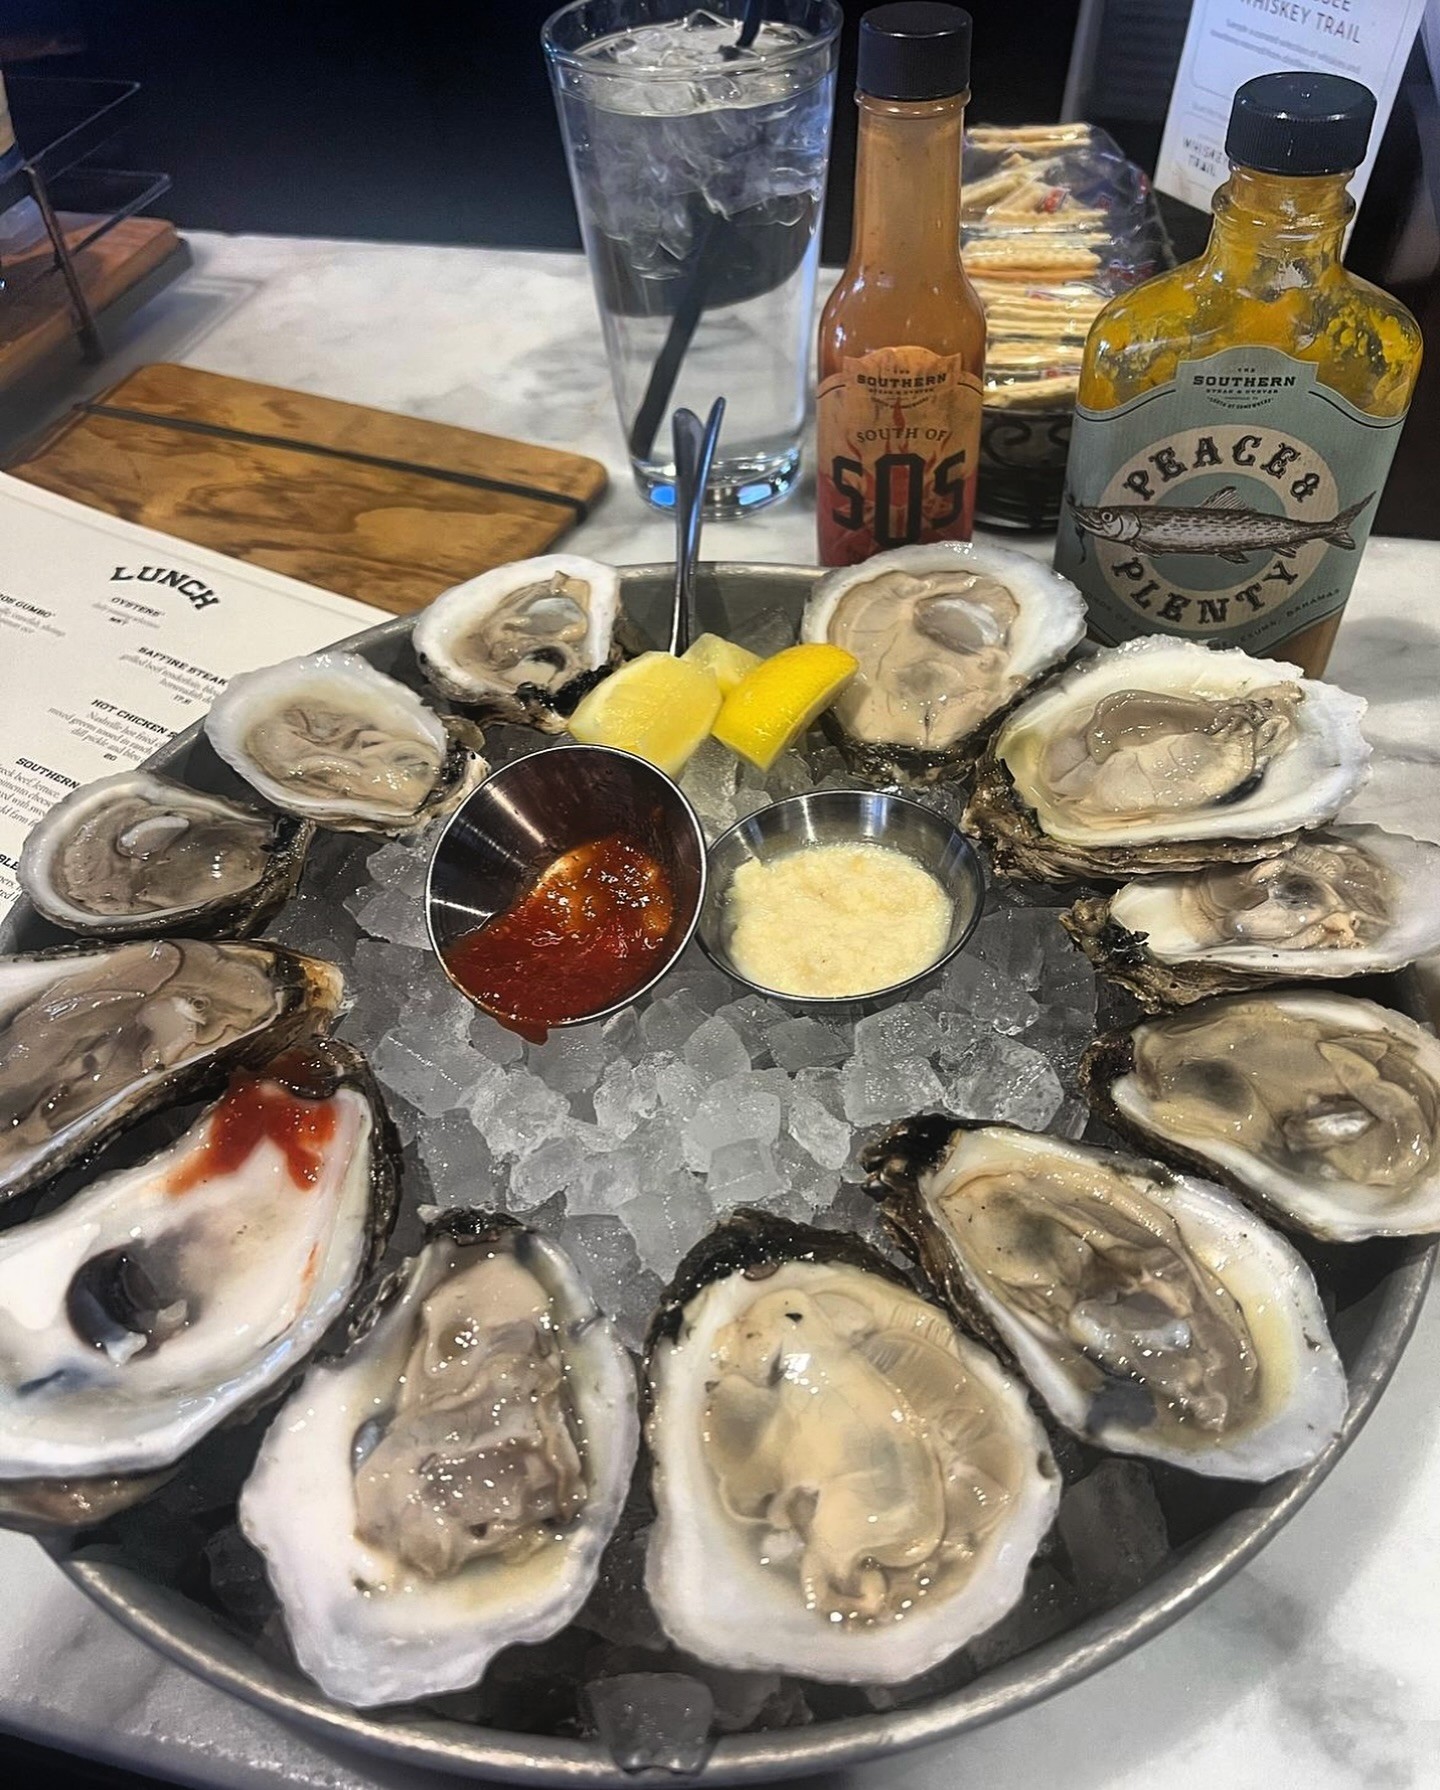 The Southern Steak & Oyster